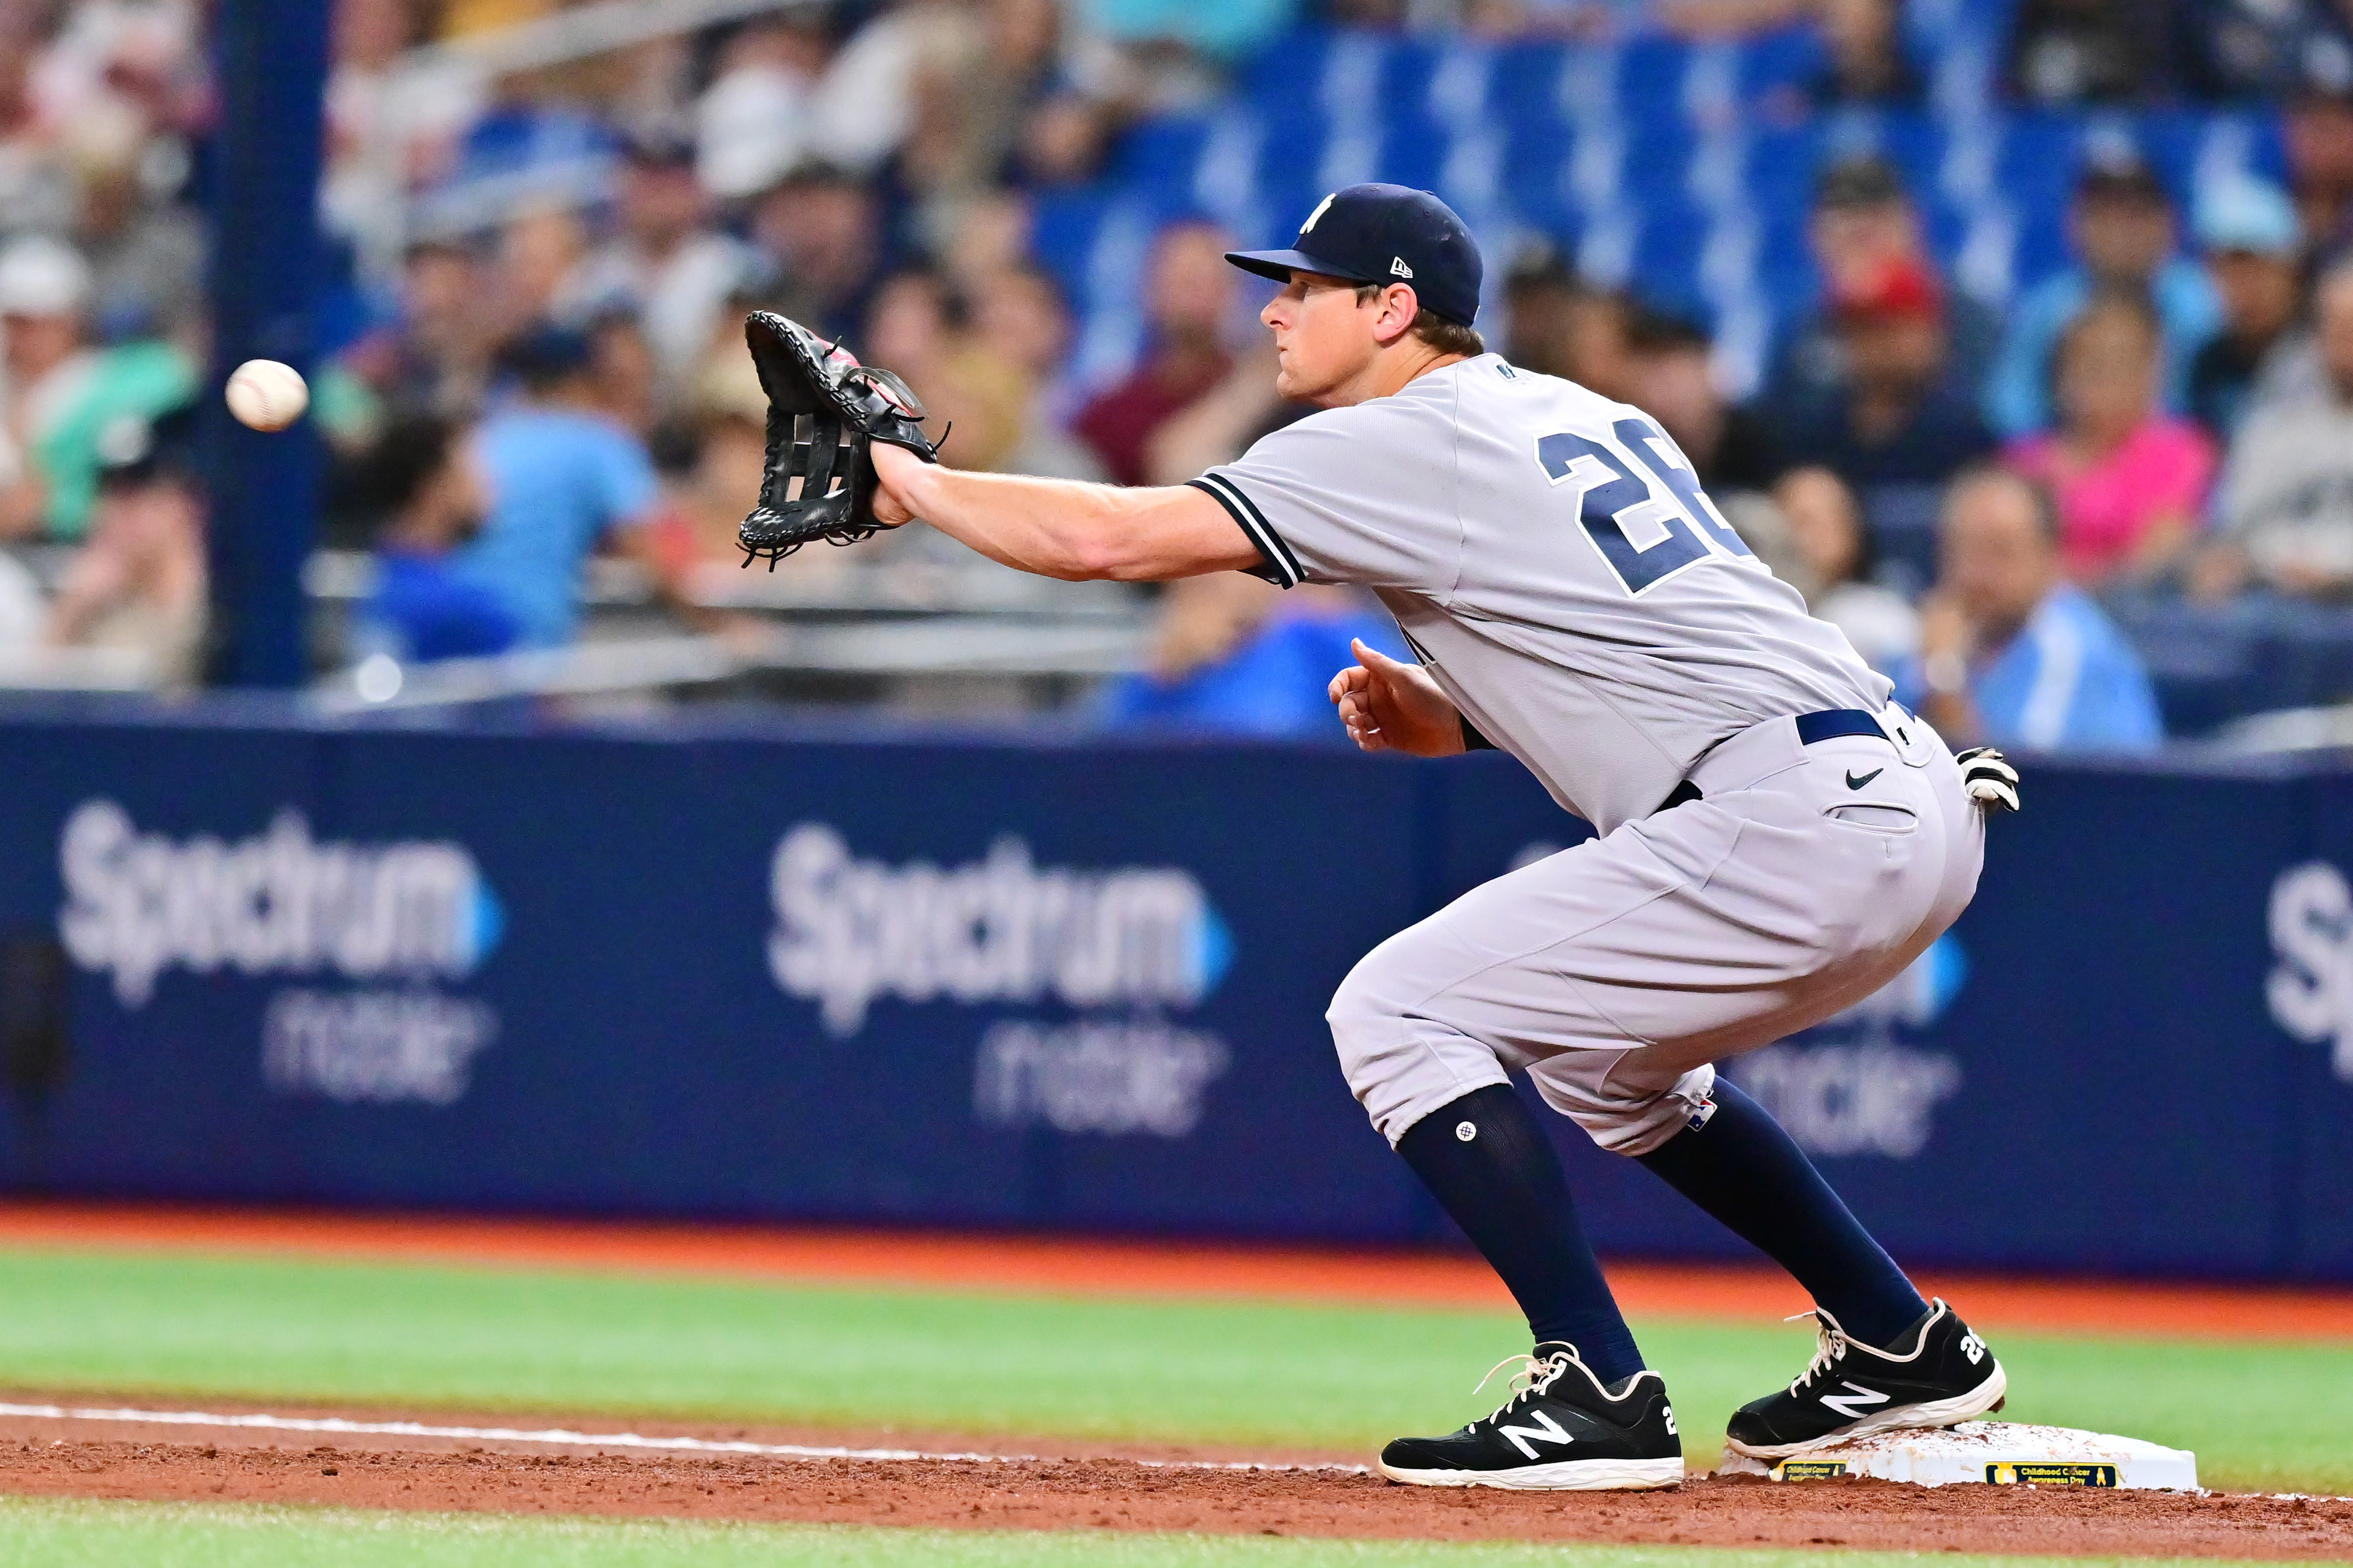 DJ LeMahieu #26 of the New York Yankees looks to catch the ball during a game against the Tampa Bay Rays at Tropicana Field on September 02, 2022 in St Petersburg, Florida.